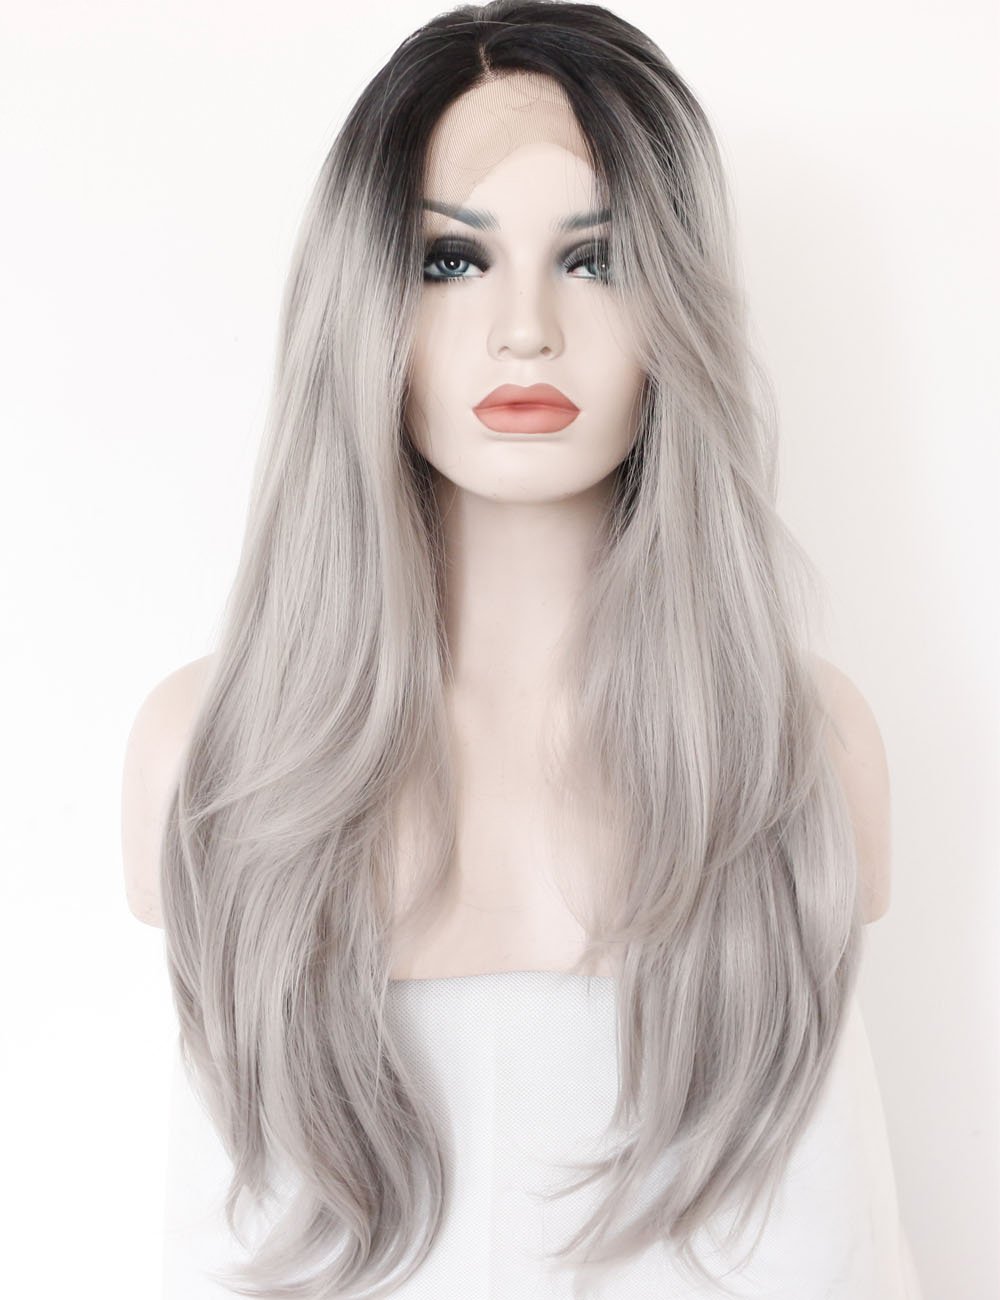 Daifeer Ombre Gray 2 Tones Synthetic Lace Front Wig Dark Roots Long Natural Straight Silver Grey Replacement Hair Wigs For Women Heat Resistant Fiber Hair Half Hand Tied 22 Inches